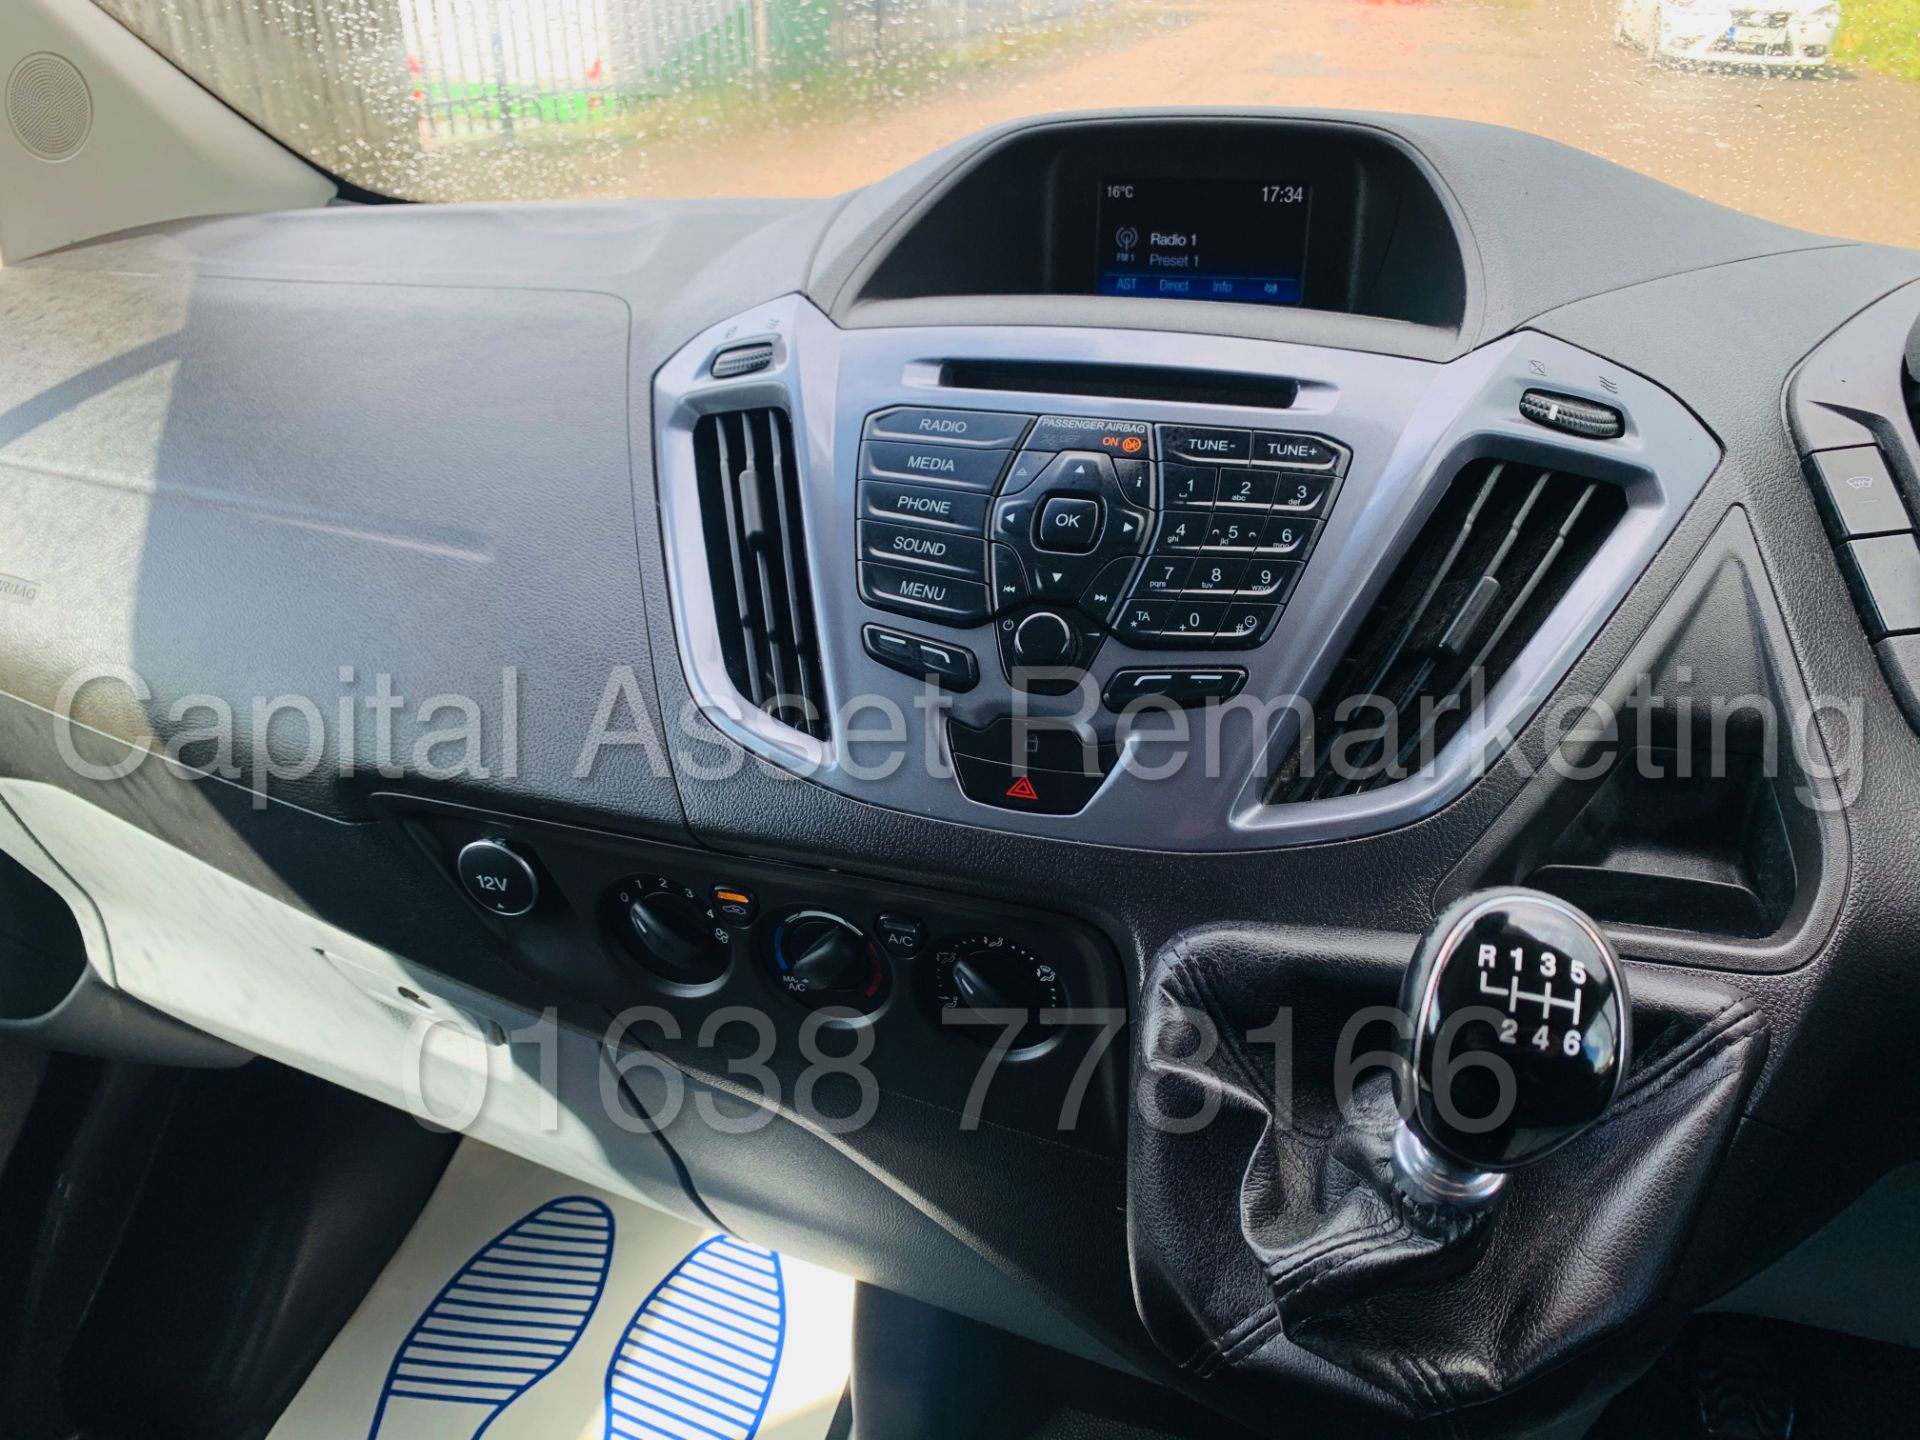 On Sale FORD TRANSIT CUSTOM *LIMITED* (2018 - EURO 6) '2.0 TDCI - 130 BHP - 6 SPEED' **LOW MILES** - Image 37 of 44